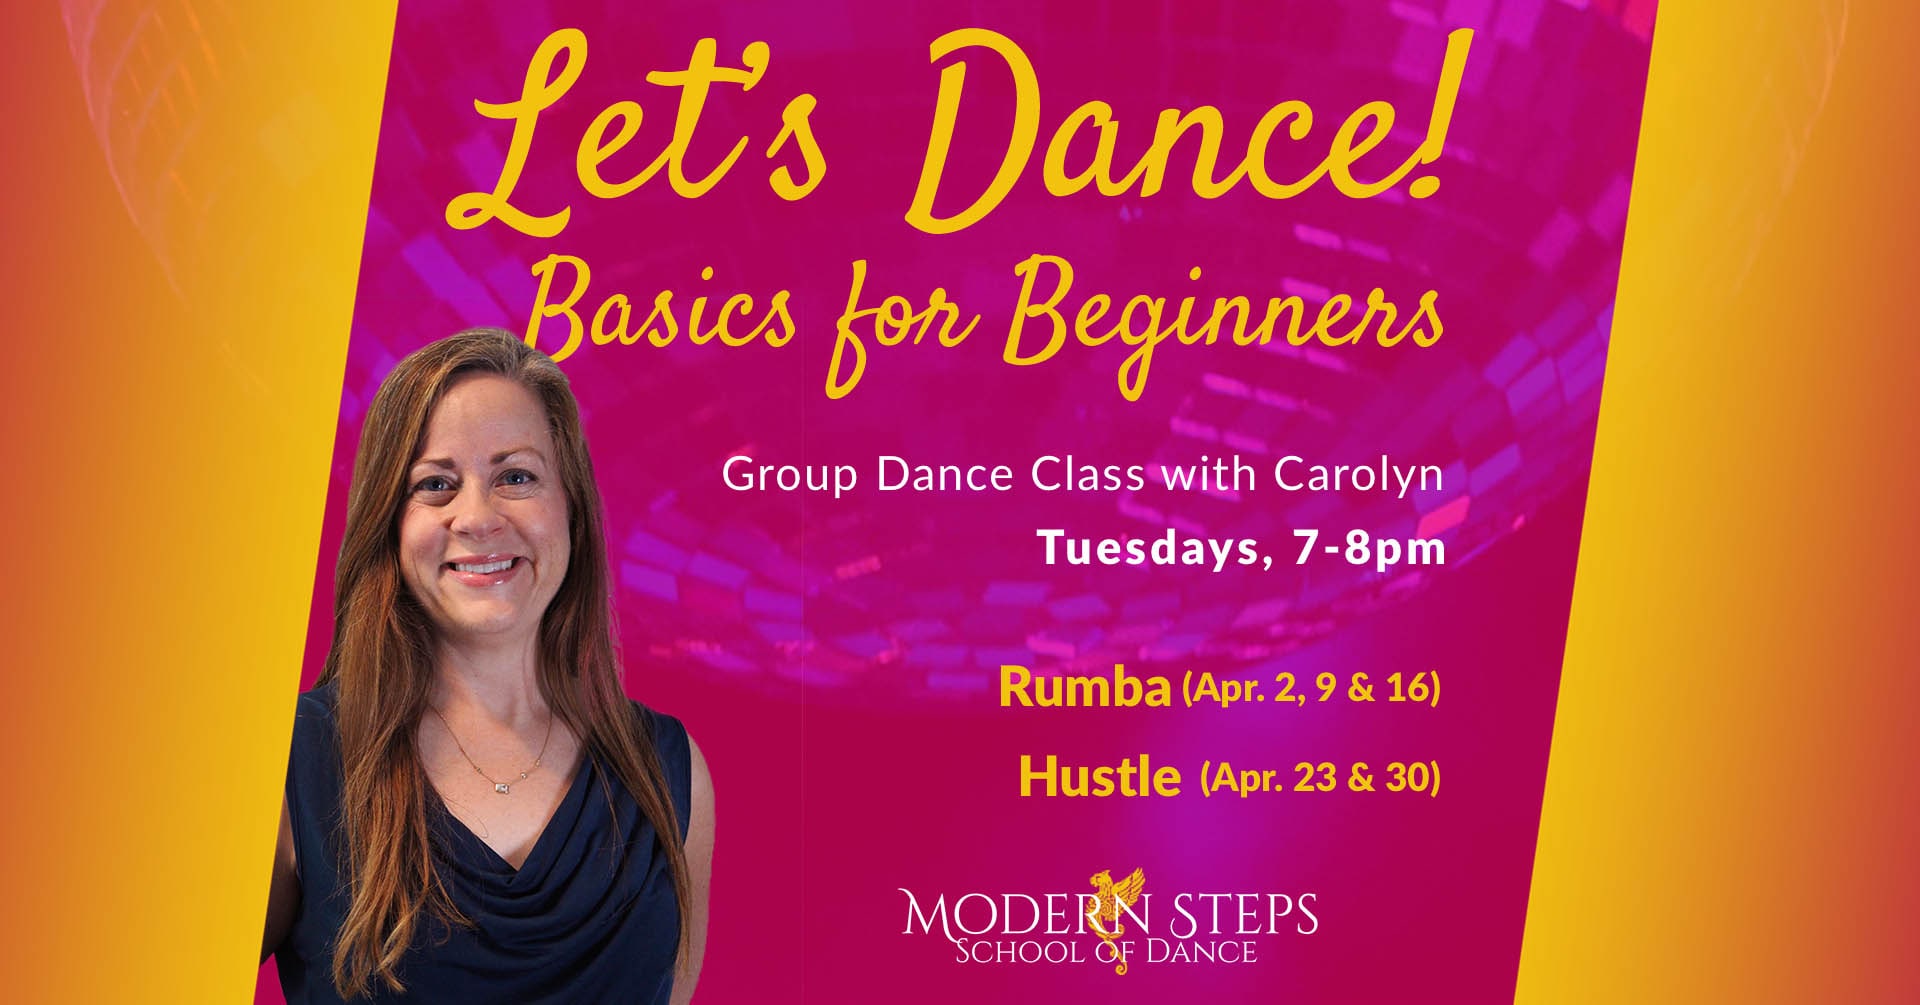 Modern Steps School of Dance Naples Florida Dance Classes - Group Ballroom Dance Lessons - Naples Florida Things to Do -- Let's Dance! Basics for Beginners with Carolyn Bivens: Rumba & Hustle